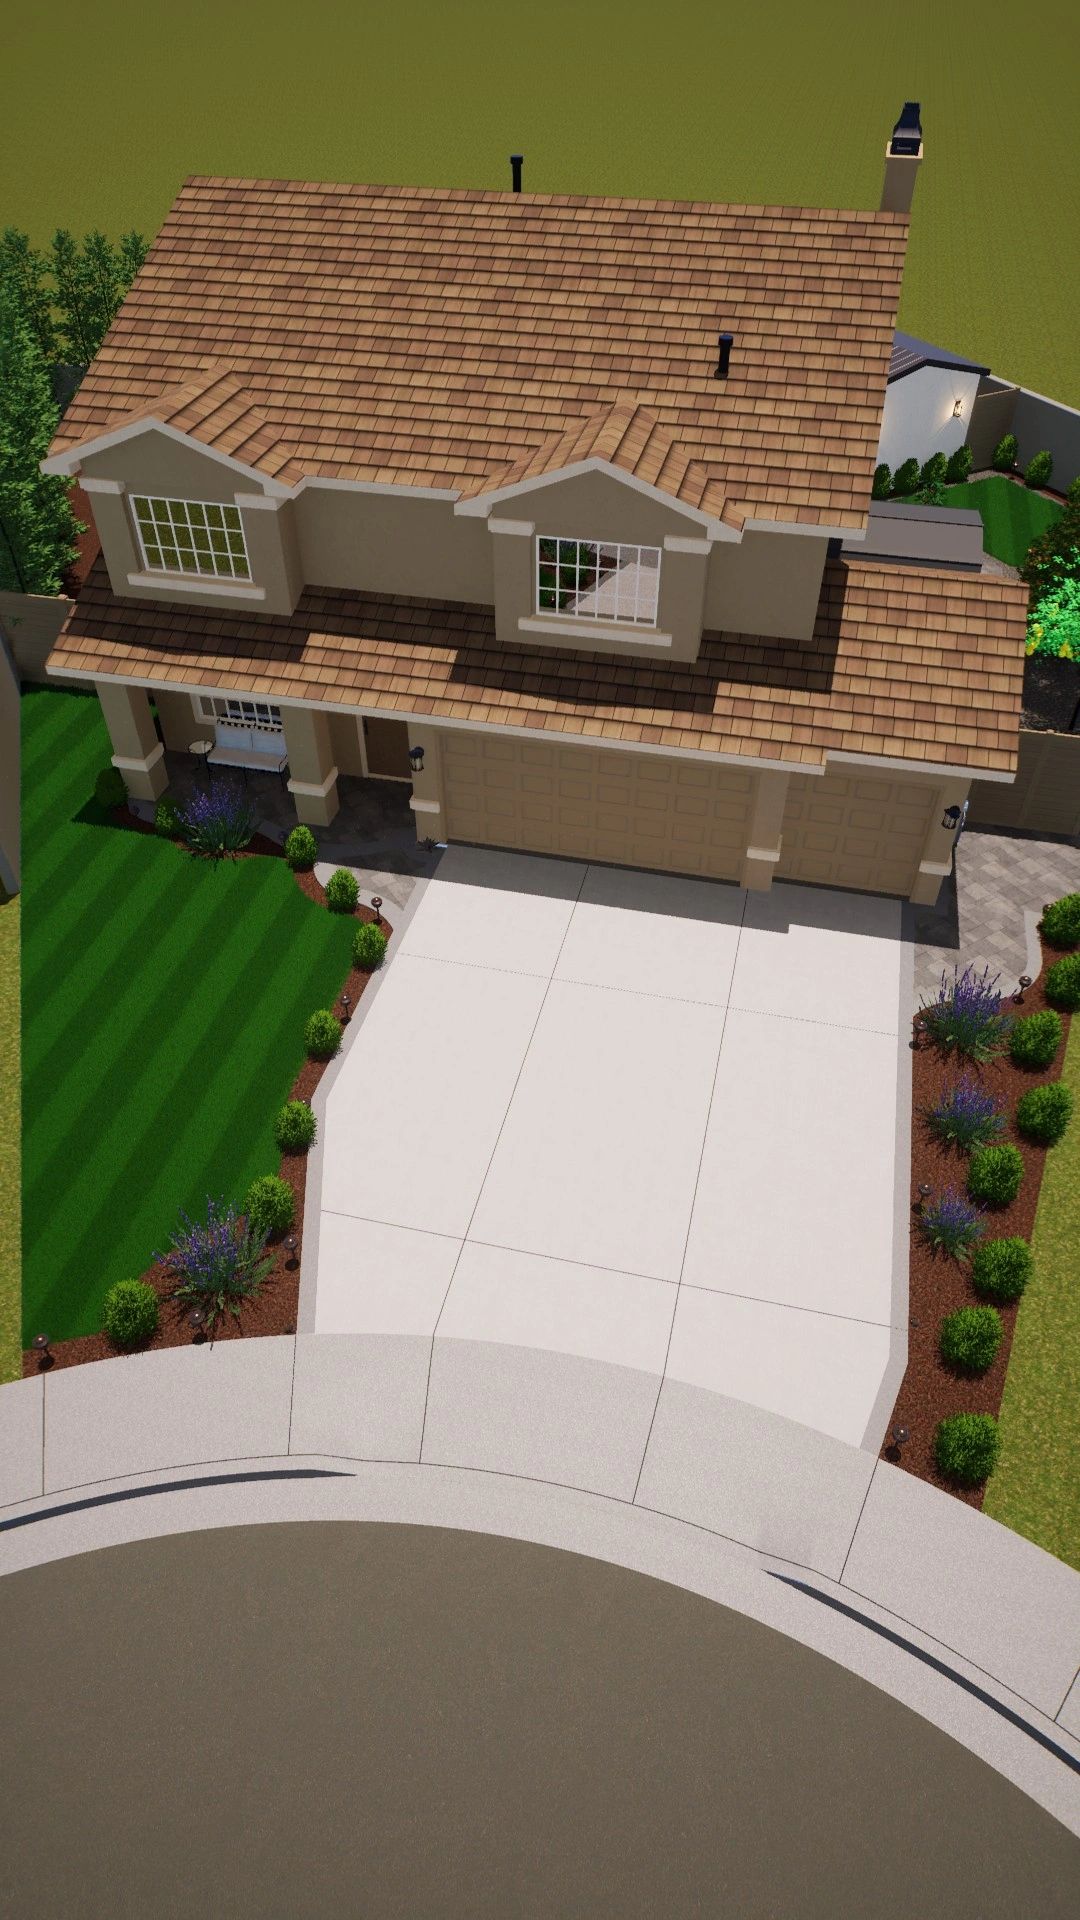 New driveway and landscape design